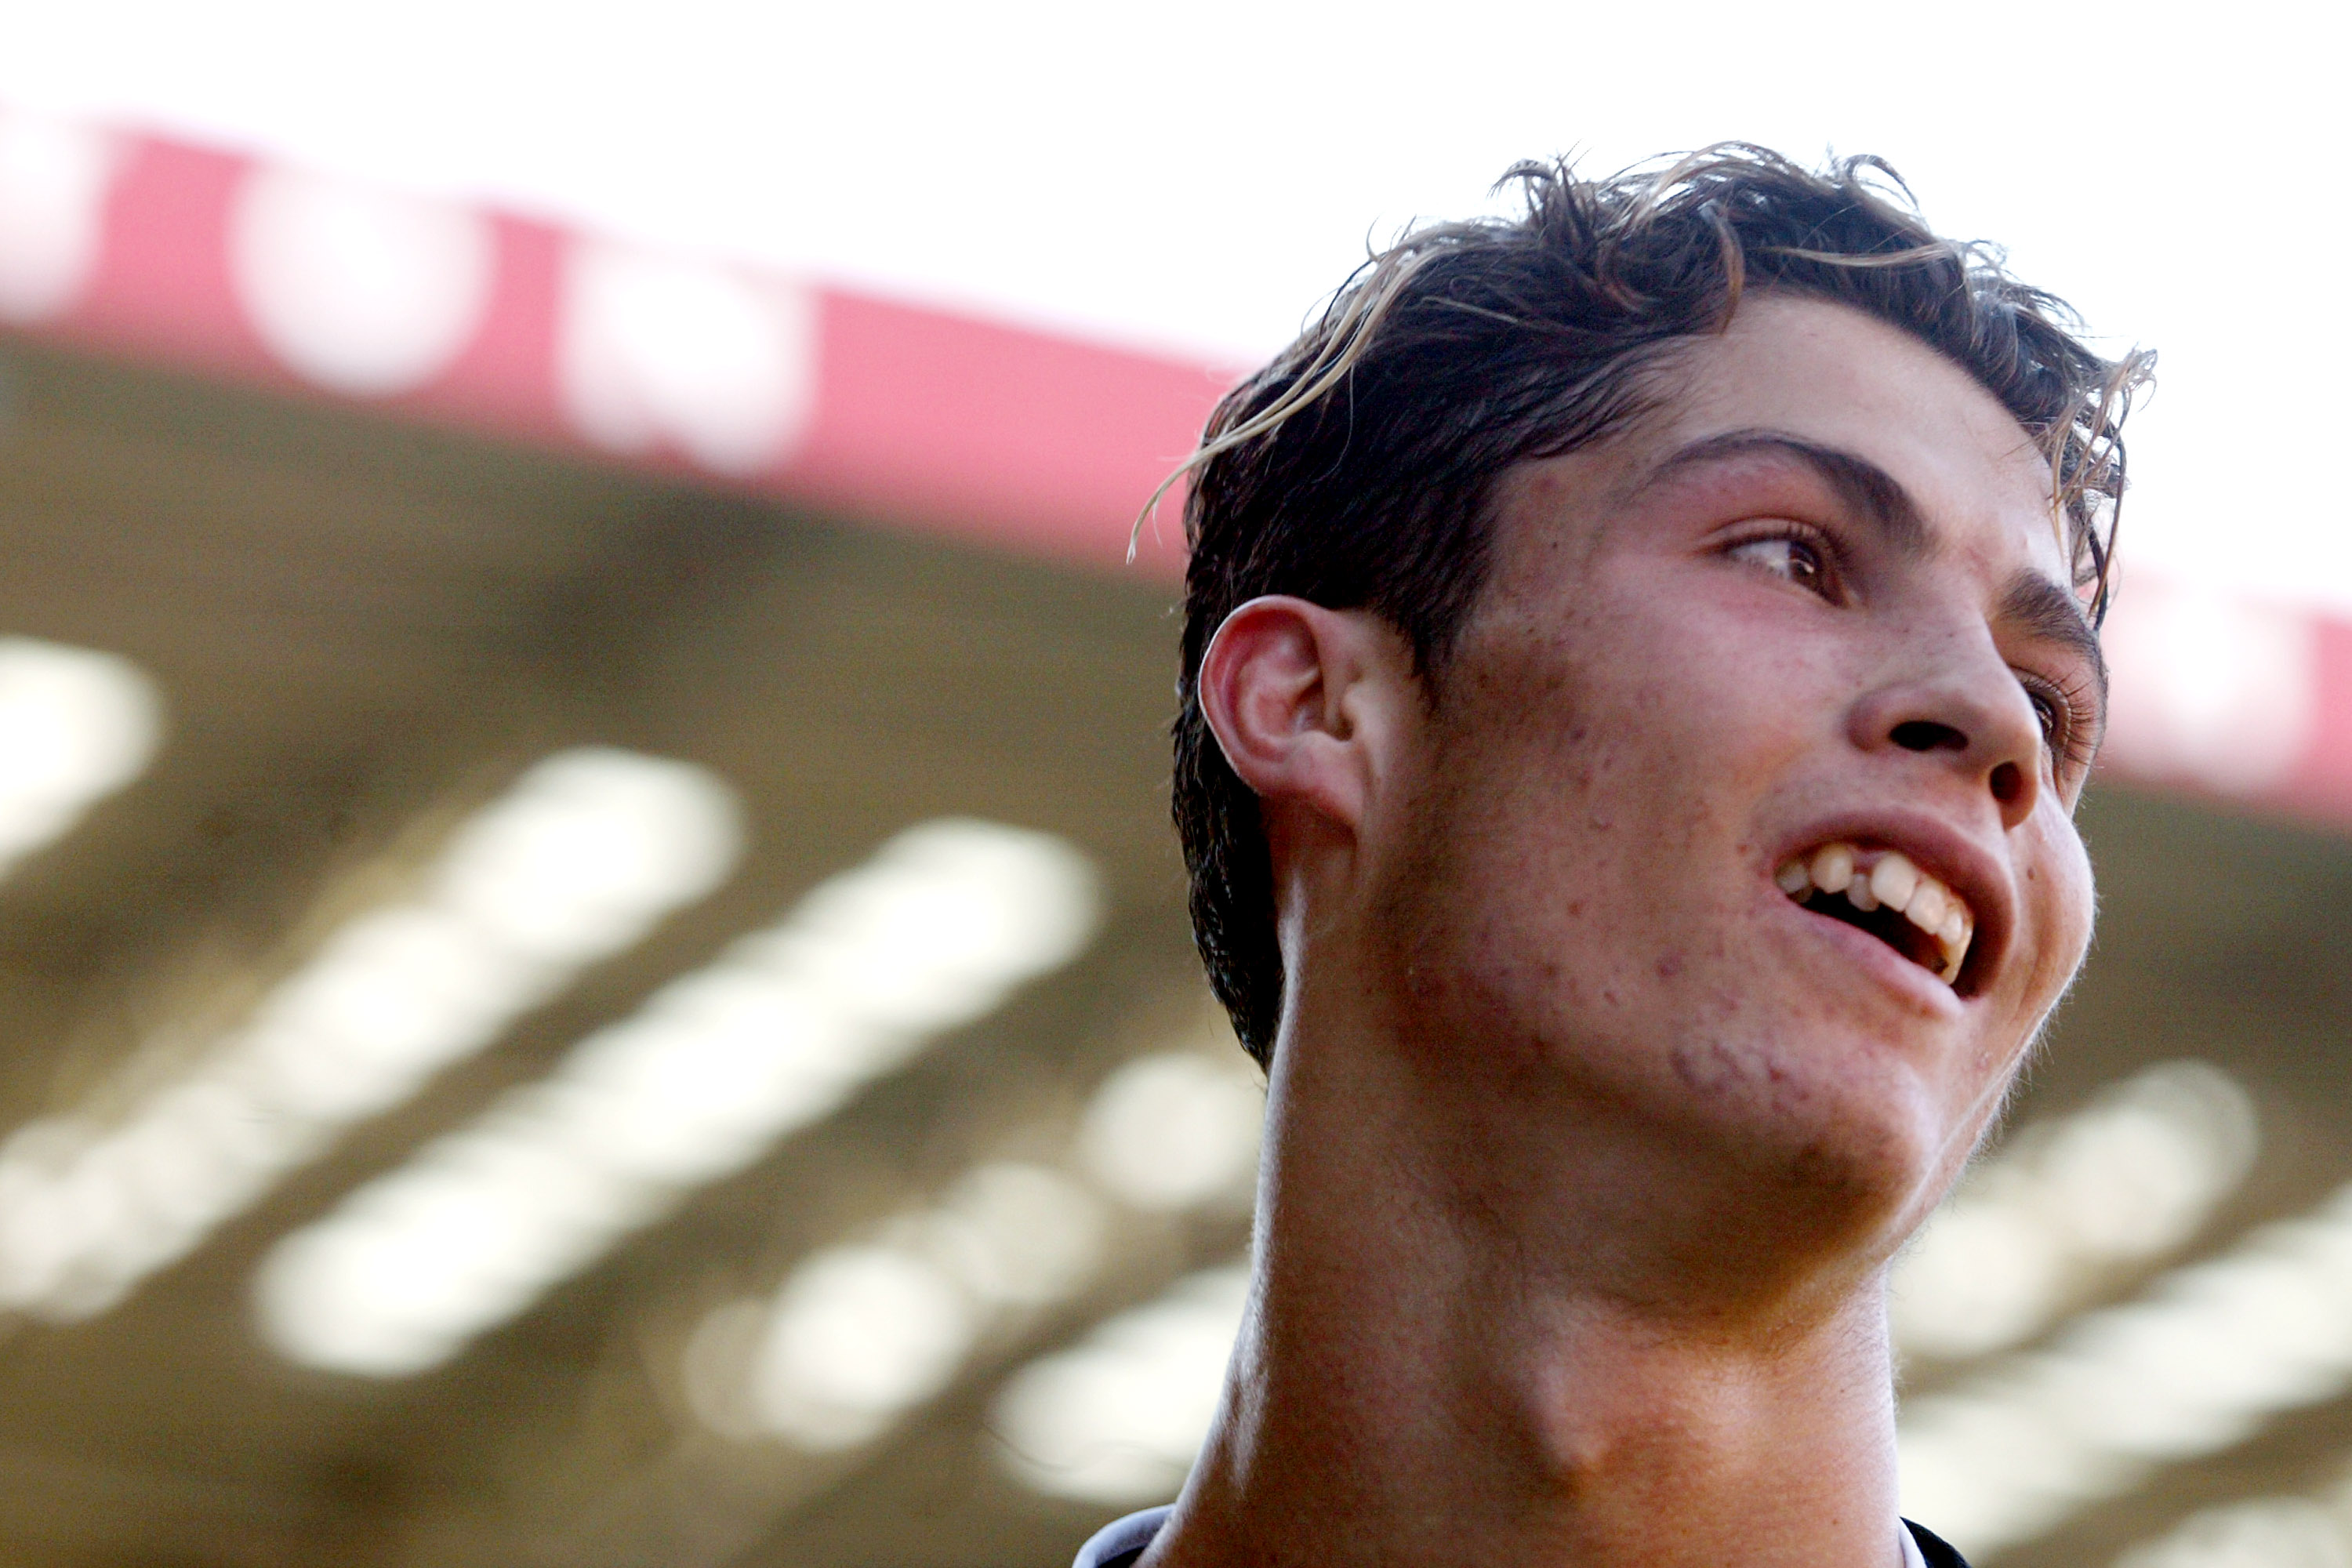 Cristiano Ronaldo during a soccer game between Charlton Athletic and Manchester United on September 13, 2003. | Source: Getty Images